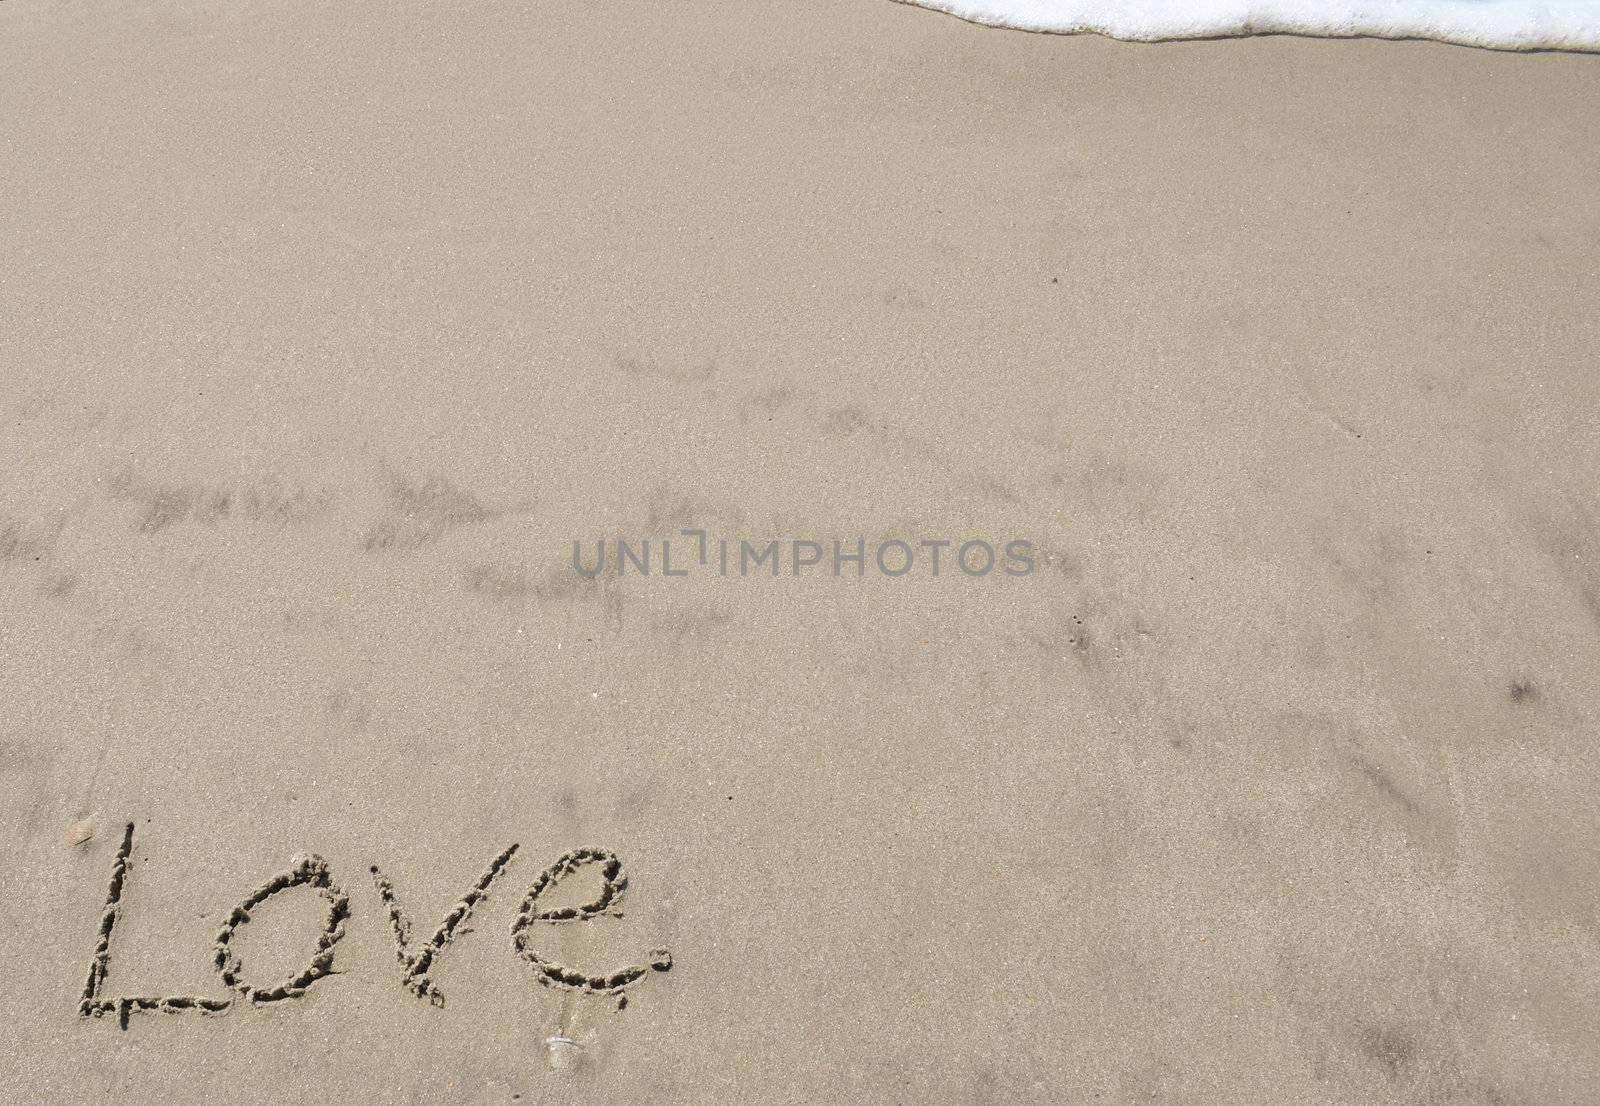 Love written in the sand with wave 9